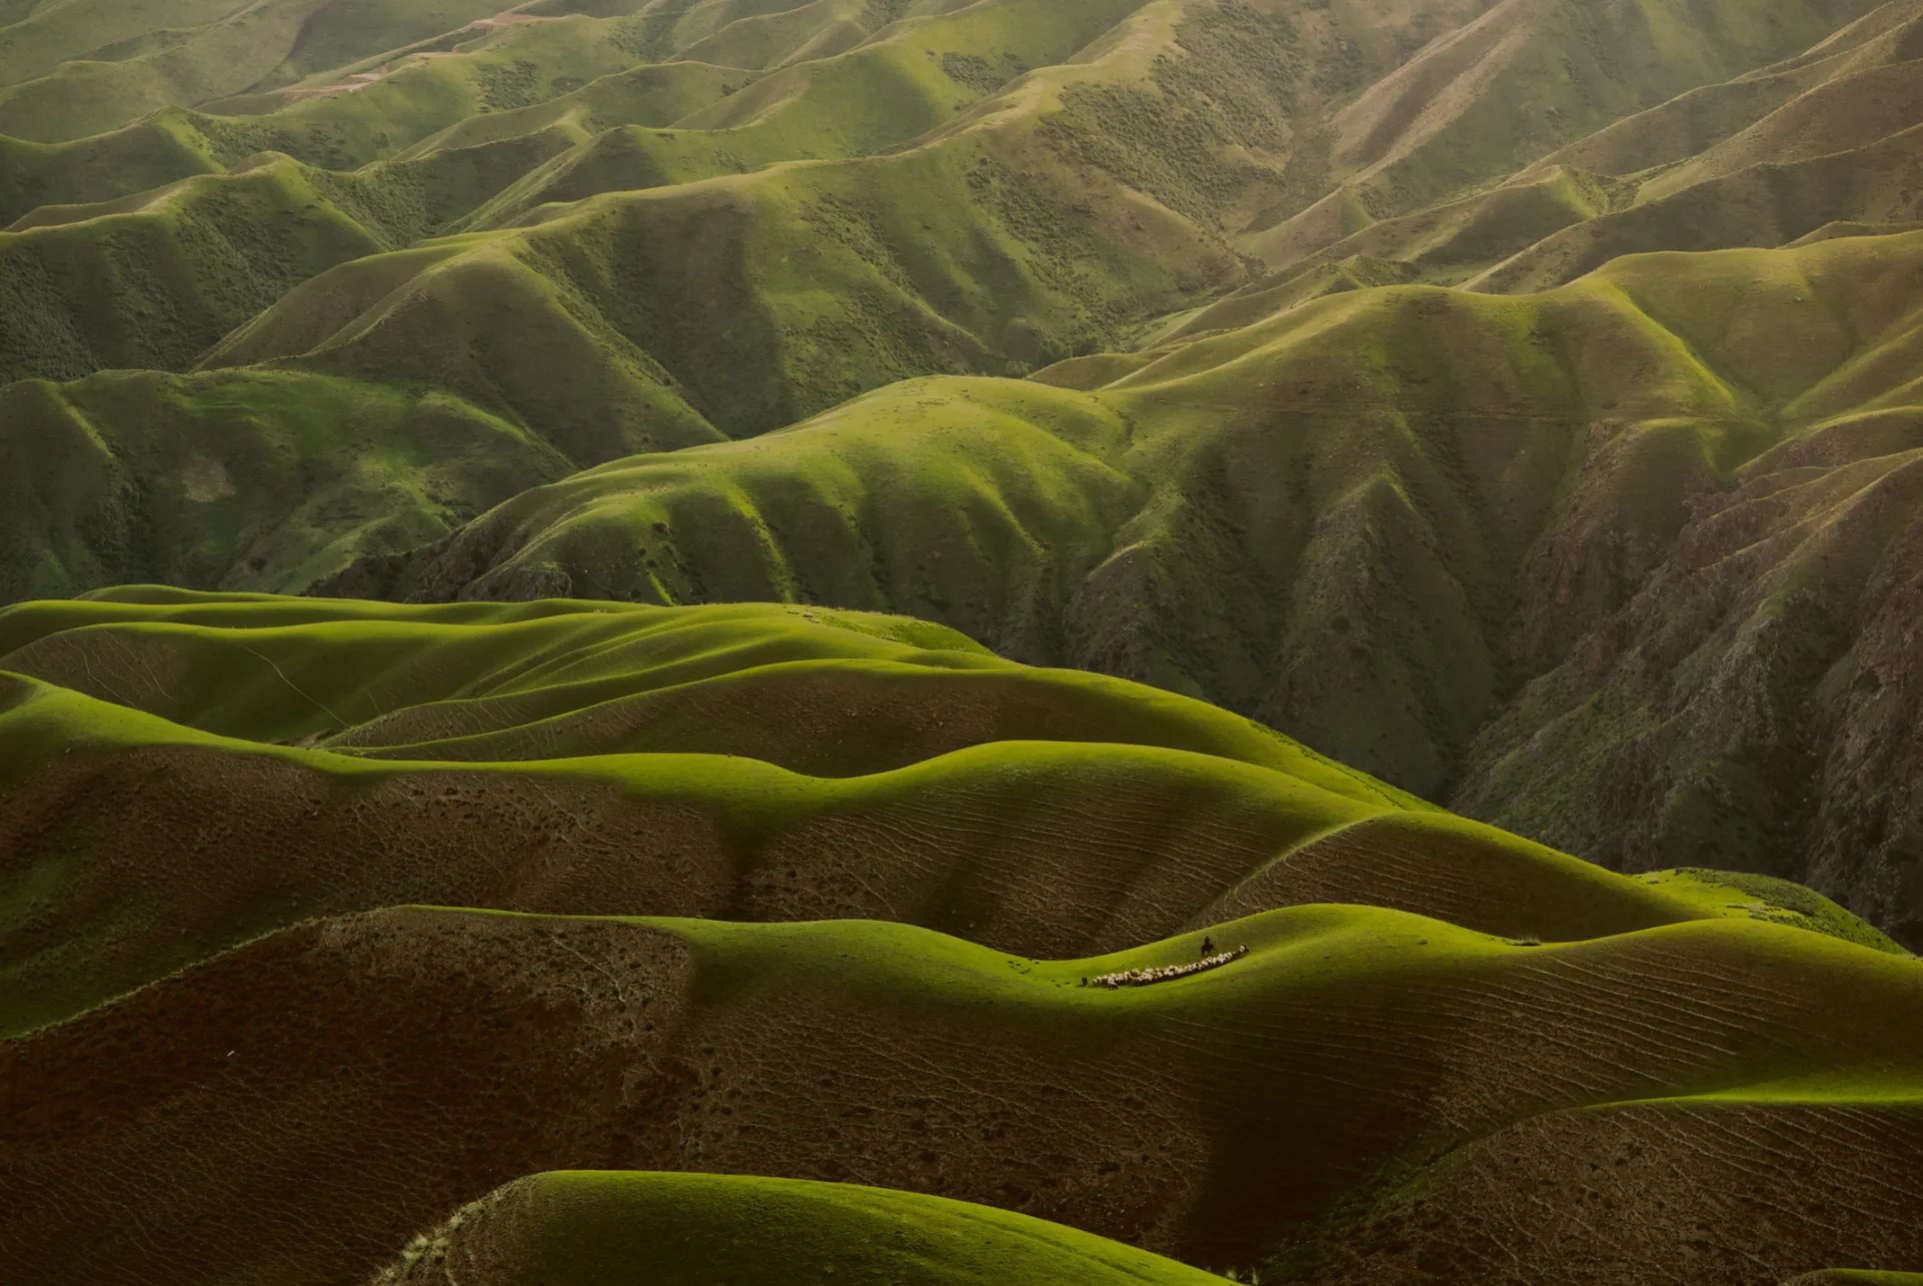 Qingbao Meng on Unsplash - valley of green hills